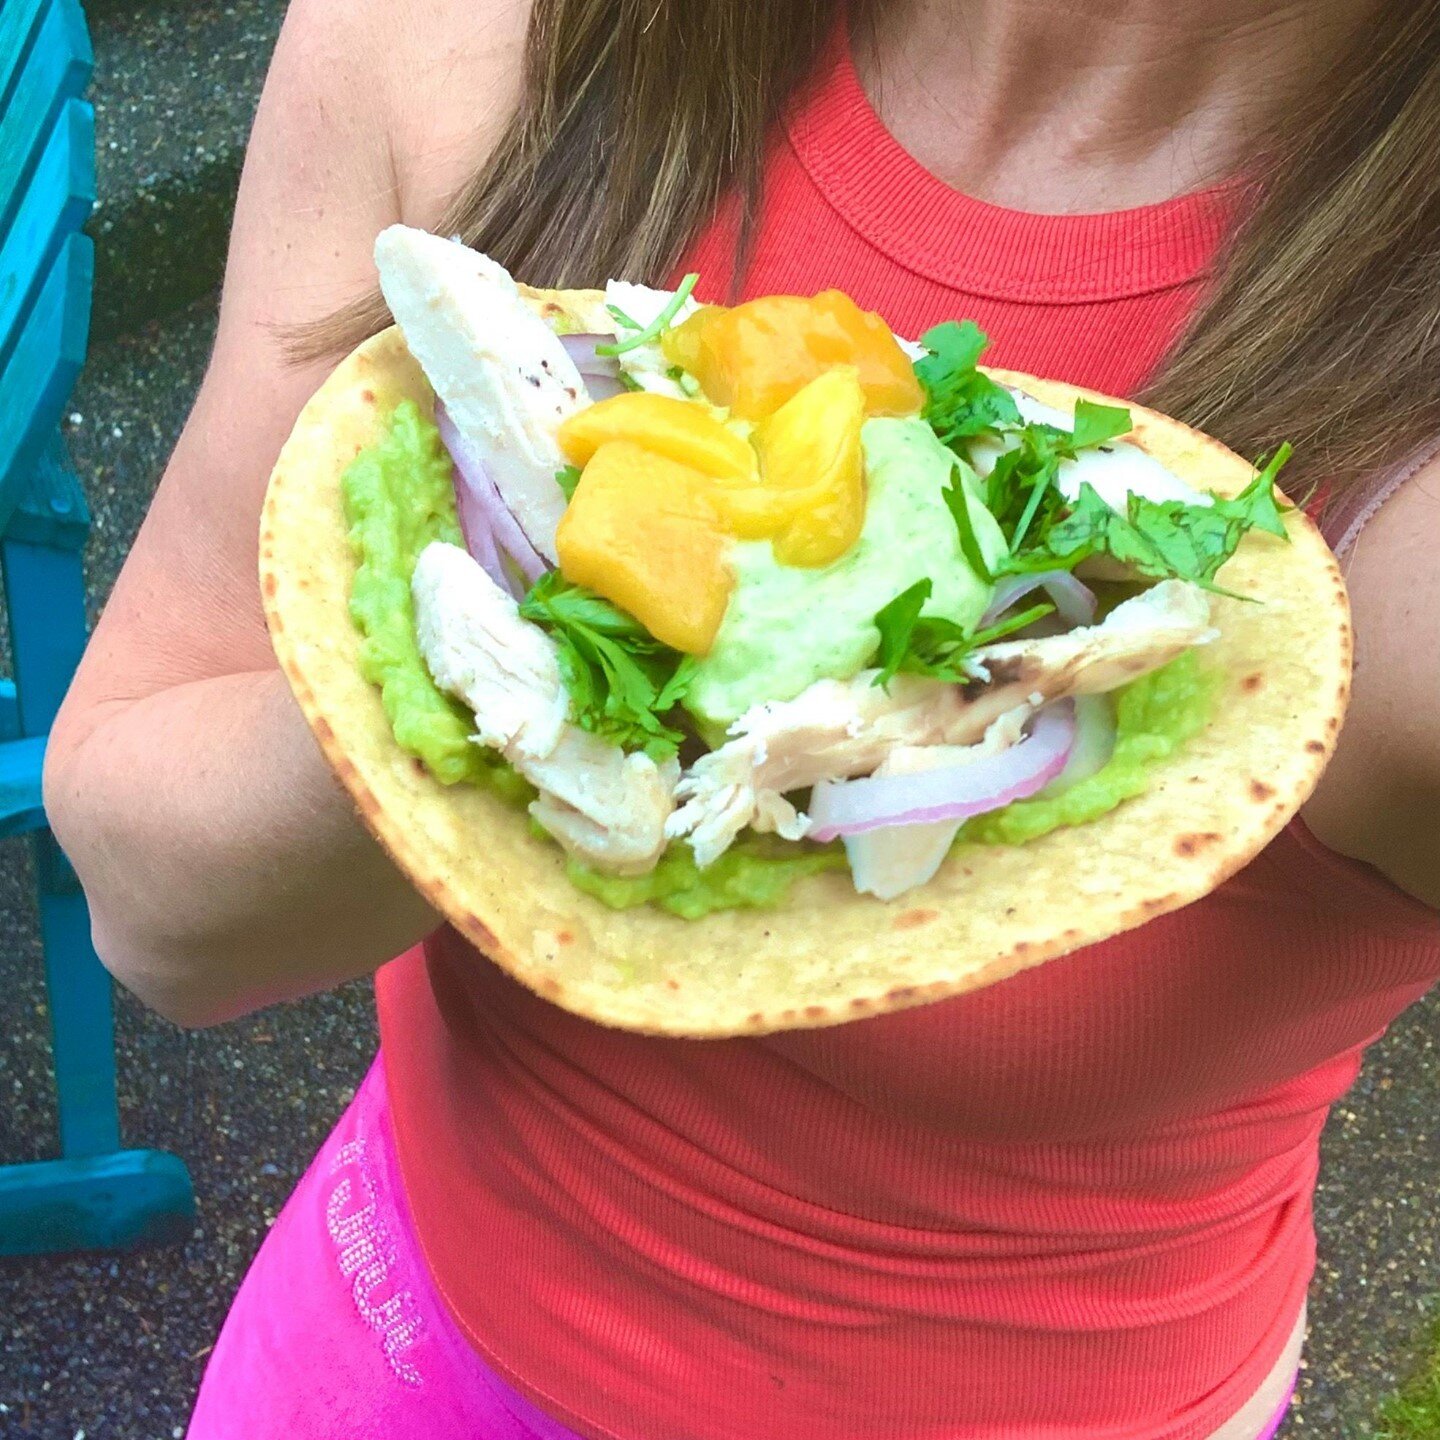 Cheers to the weekend!!⠀
⠀
Getting the celebration started early with these mango chicken tostadas. All you need to make 'em is:⠀
⠀
grilled or fried grain-free tortillas (I use @sietefoods)⠀
avocados⠀
garlic, salt + pepper⠀
shredded chicken (rotisser